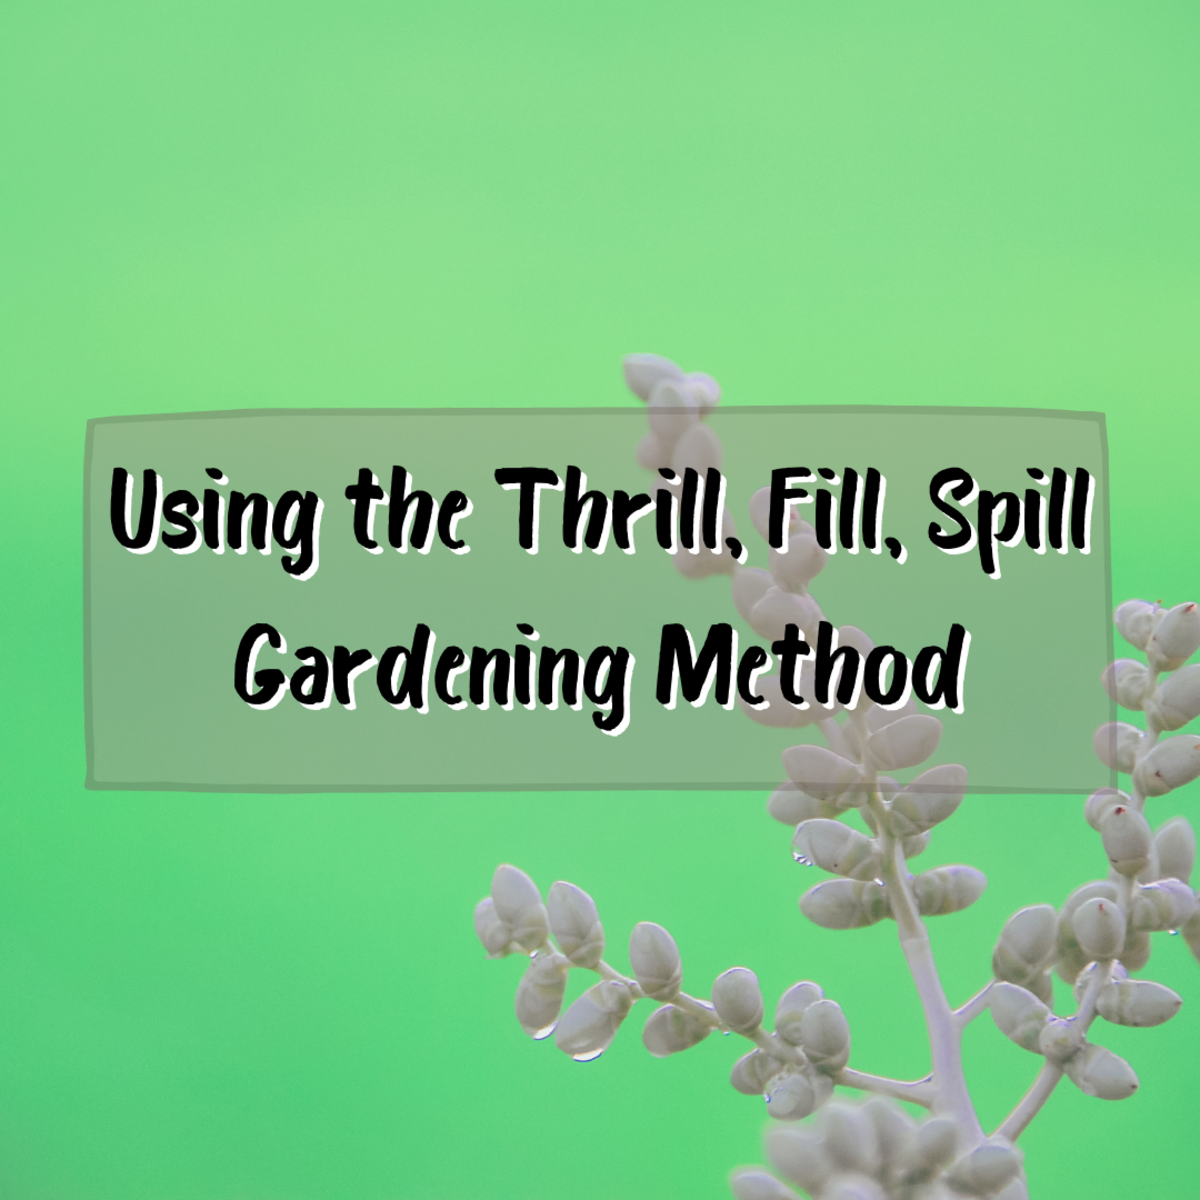 How to Use the Thrill, Fill, and Spill Gardening Method